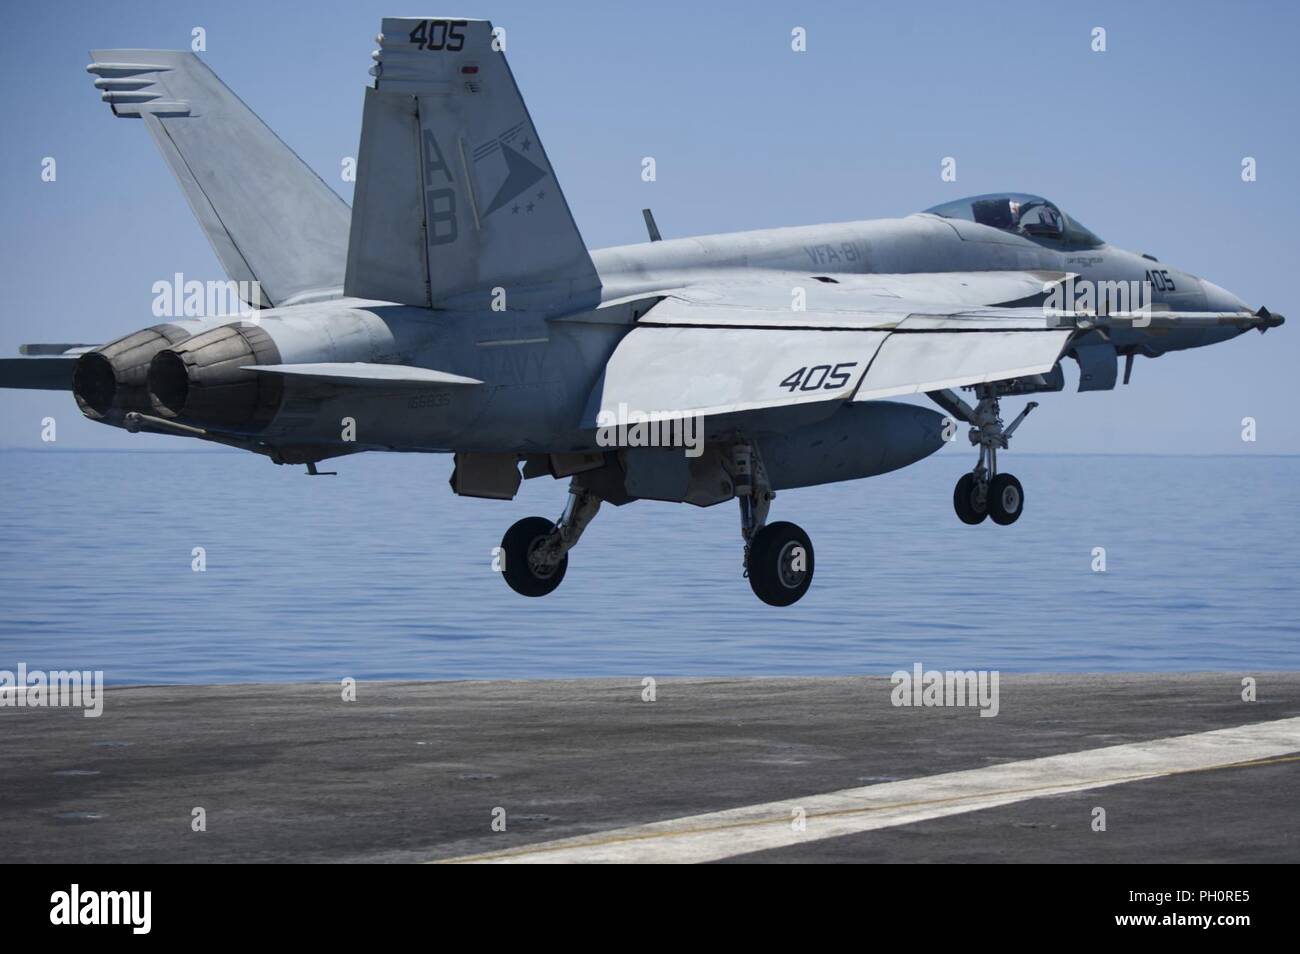 MEDITERRANEAN SEA (June 20, 2018) An F/A-18E Super Hornet, assigned to the 'Sunliners' of Strike Fighter Squadron (VFA) 81, launches from the flight deck aboard the Nimitz-class aircraft carrier USS Harry S. Truman (CVN 75). Harry S. Truman is currently deployed as part of an ongoing rotation of U.S. forces supporting maritime security operations in international waters around the globe. Stock Photo